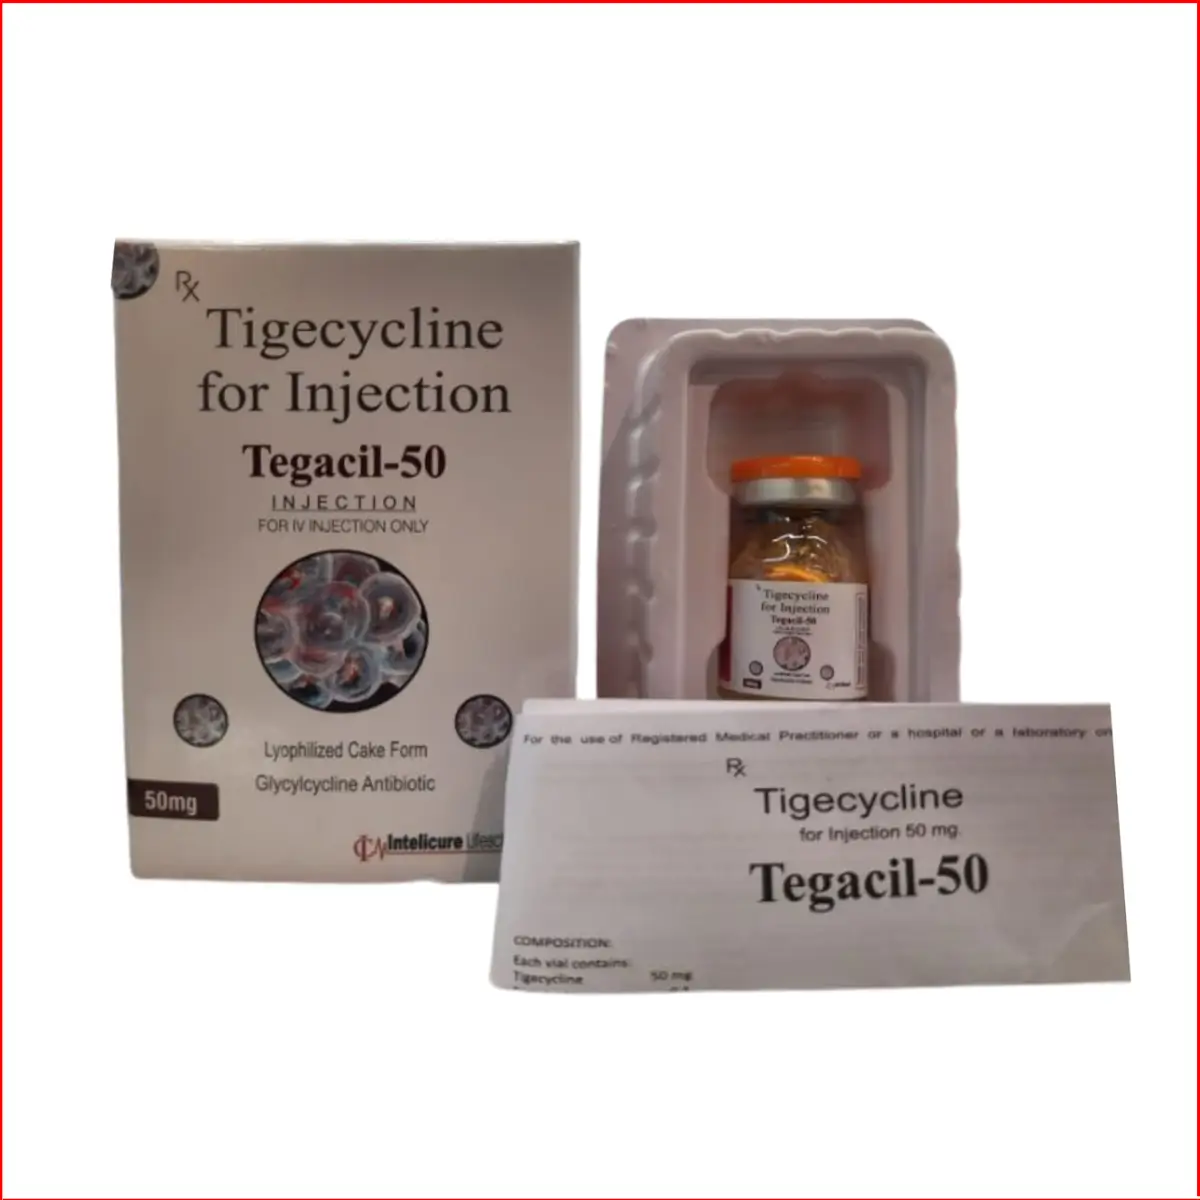 Tigecycline for injection